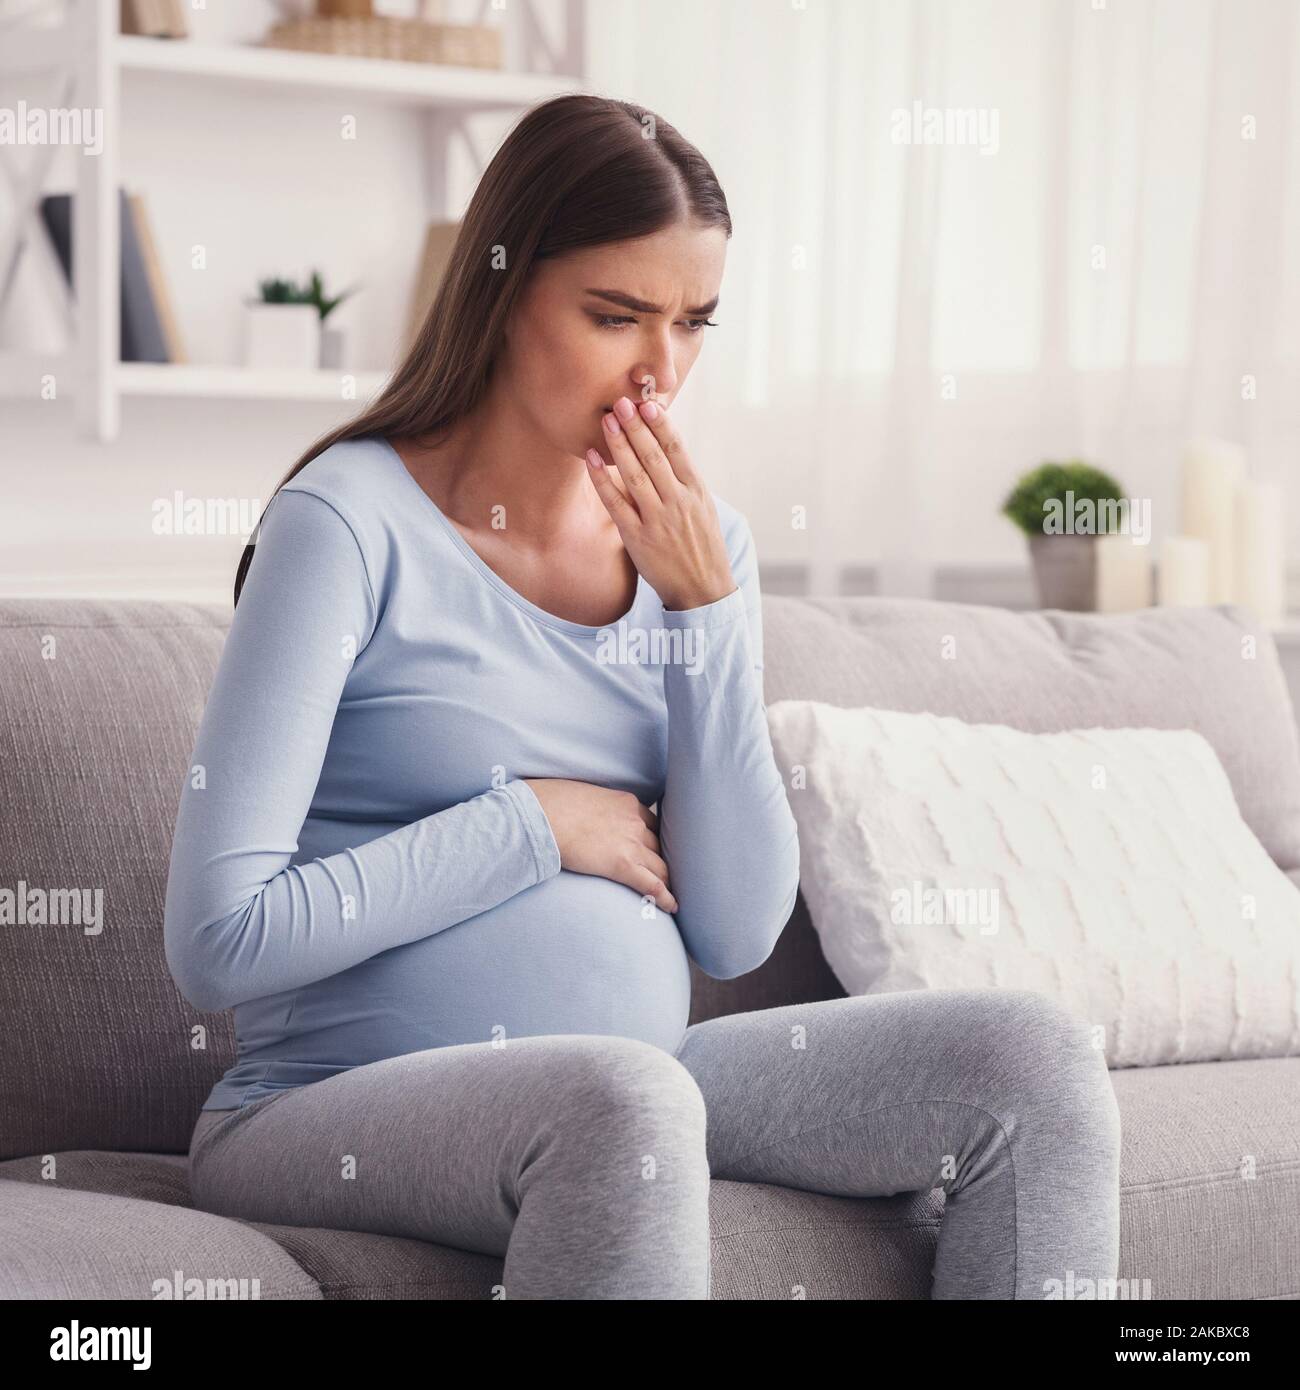 Pregnant Woman Feeling Sick Having Pregnancy Morning Sickness Sitting On Couch At Home Stock Photo